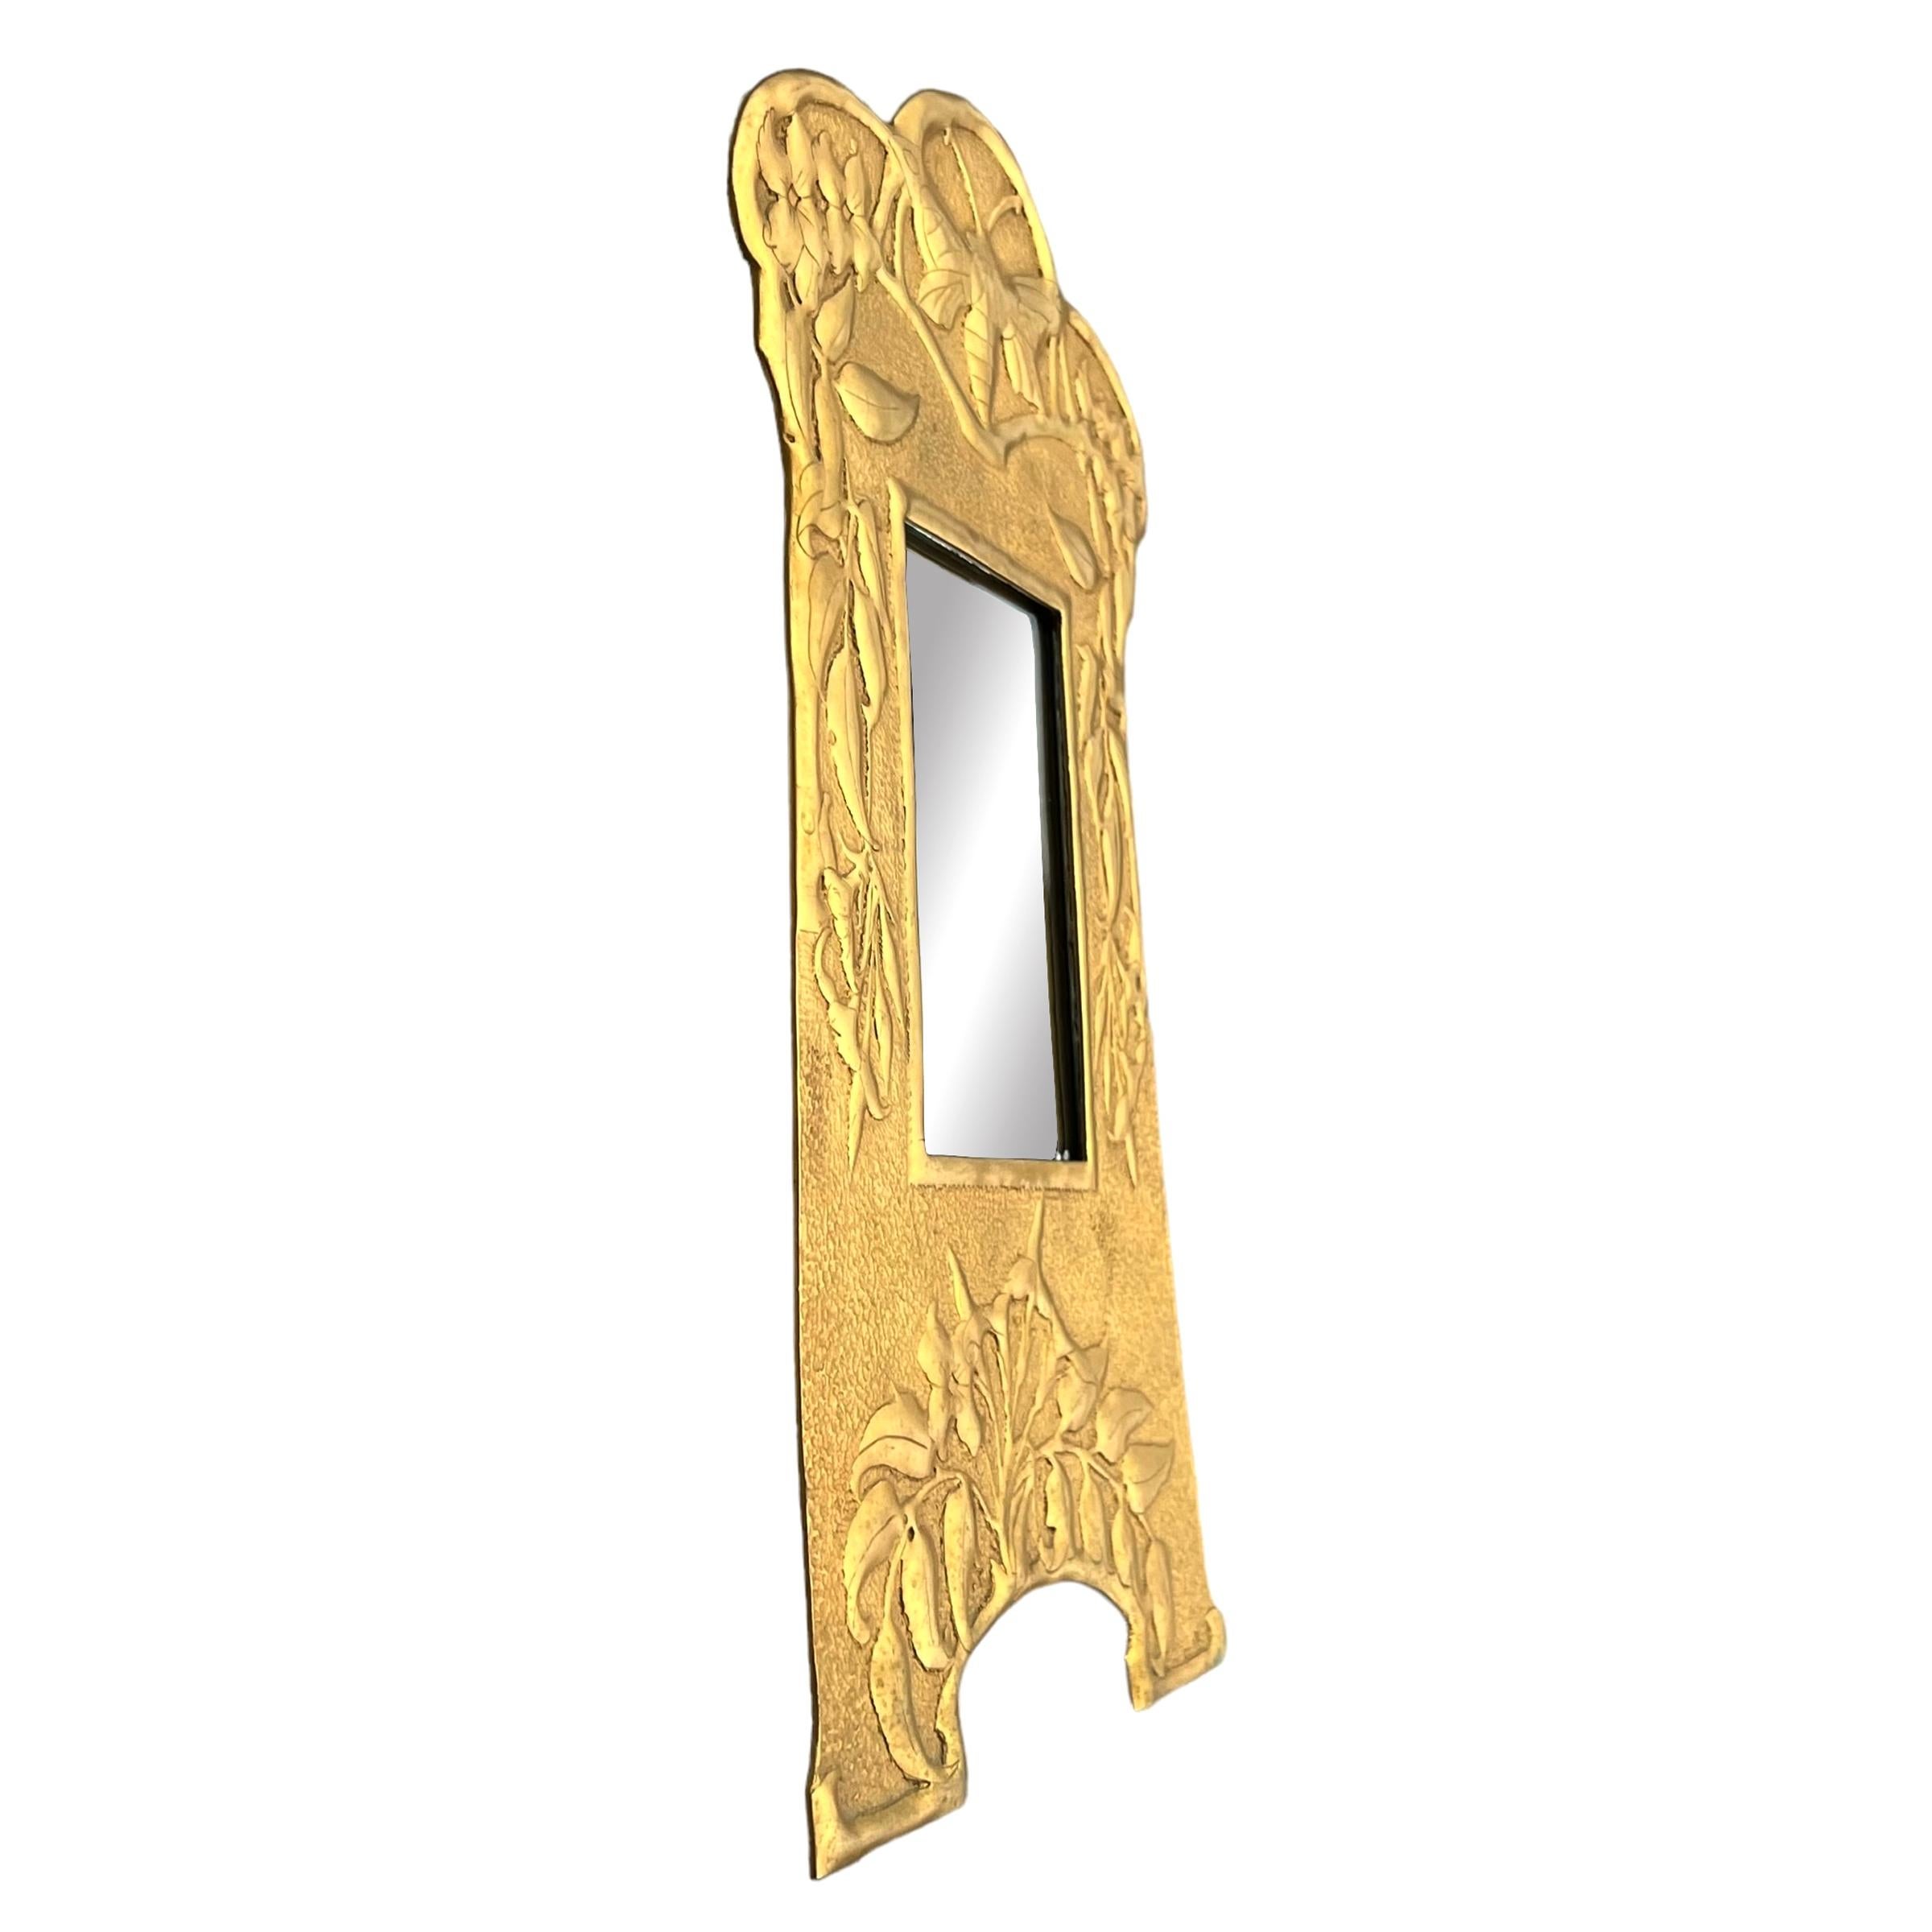 Early 20th Century English Art Nouveau Brass Framed Mirror For Sale 1